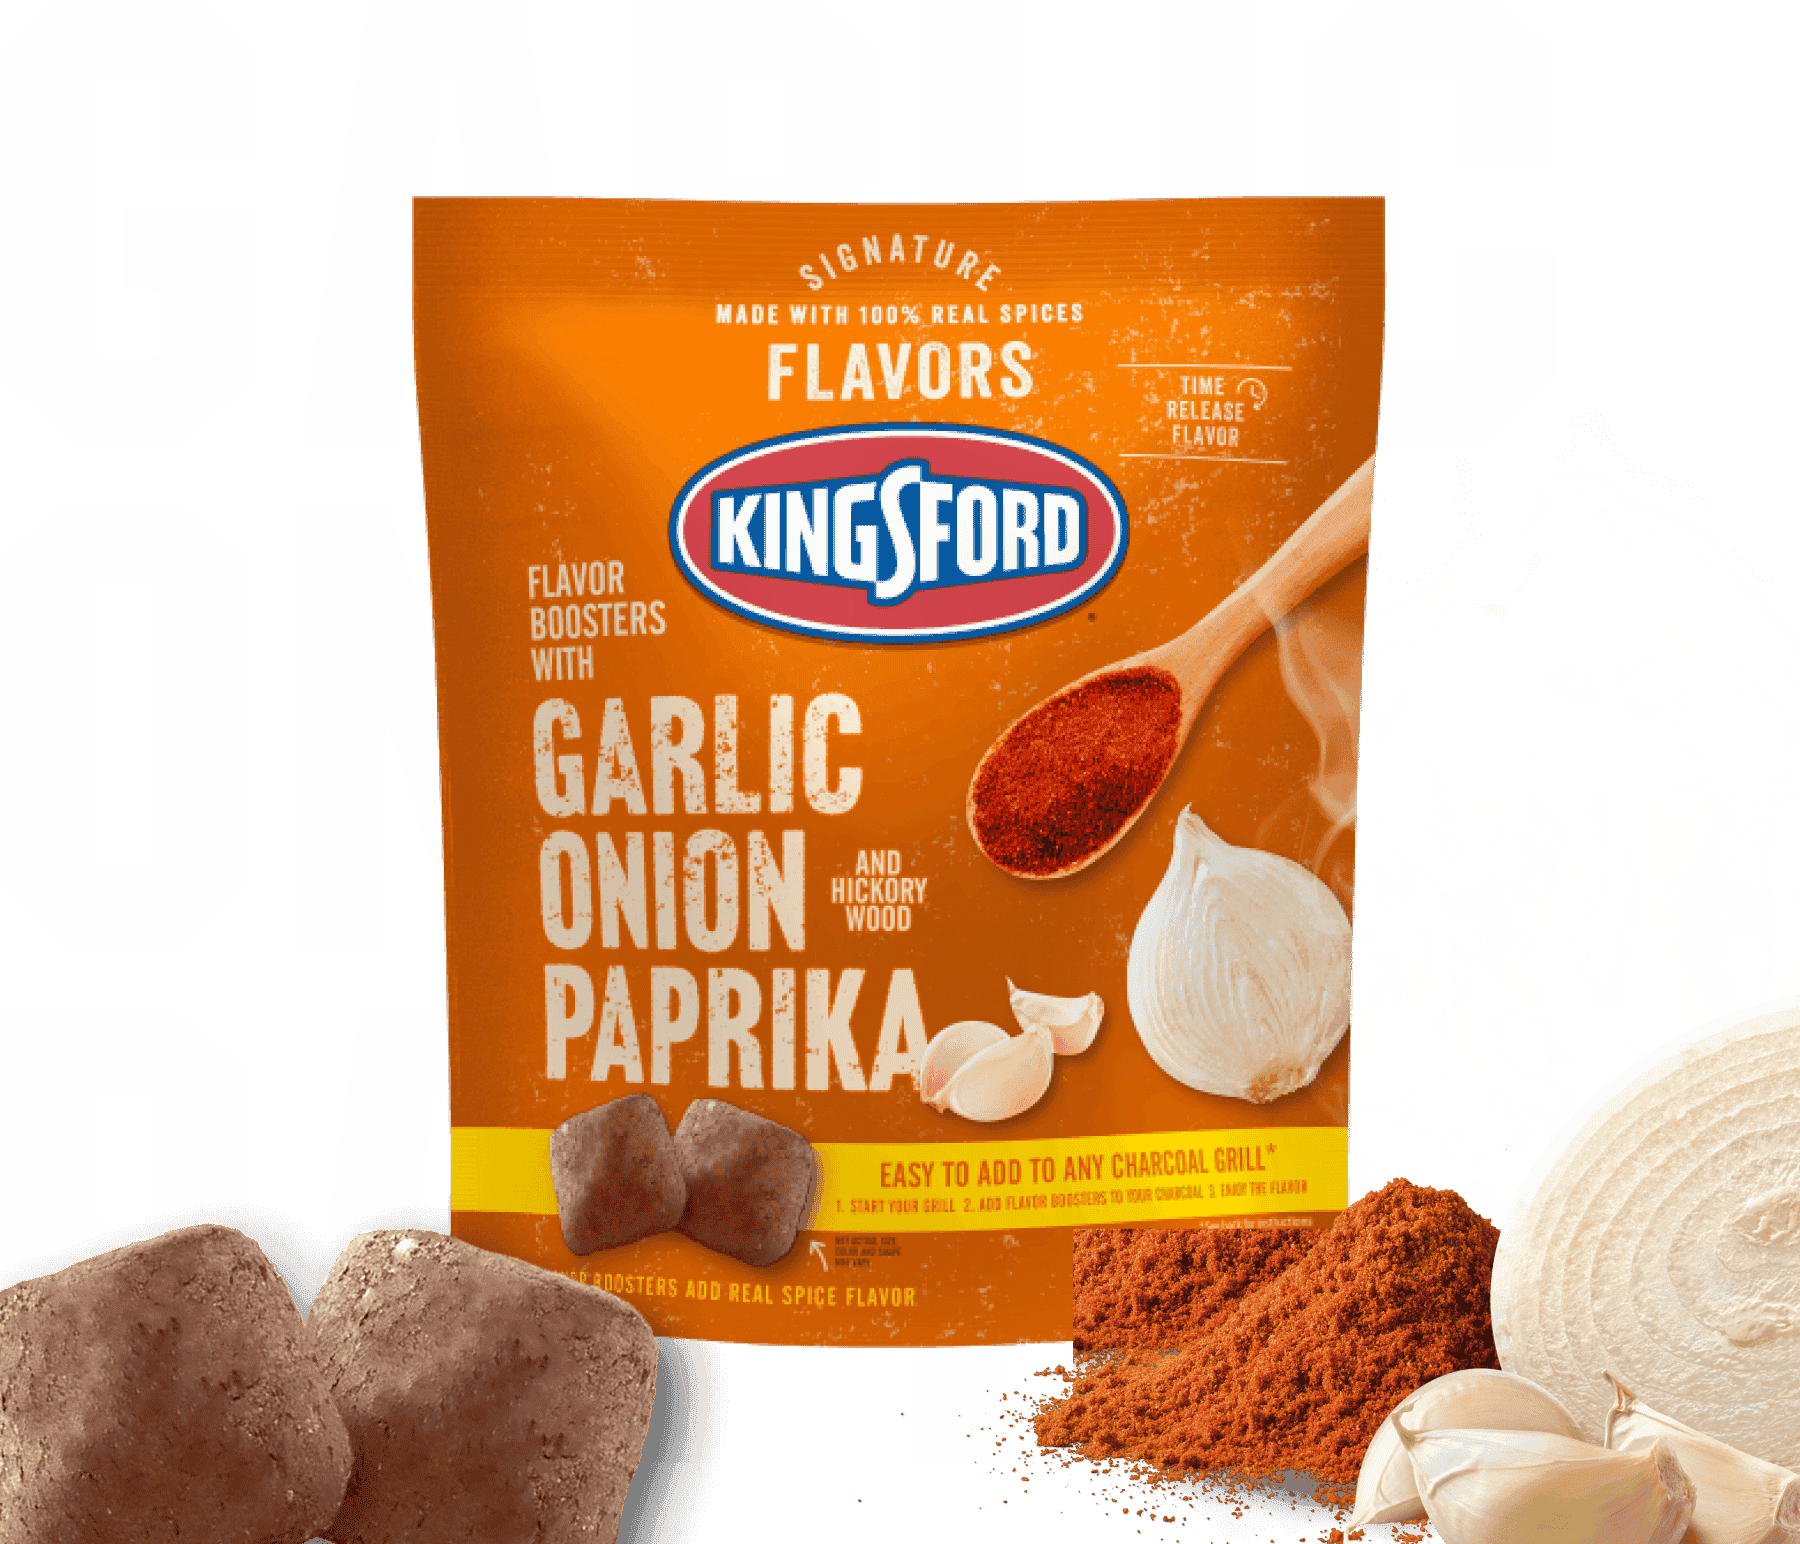 Kingsford® Signature Flavors Flavor Boosters — Garlic Onion Paprika